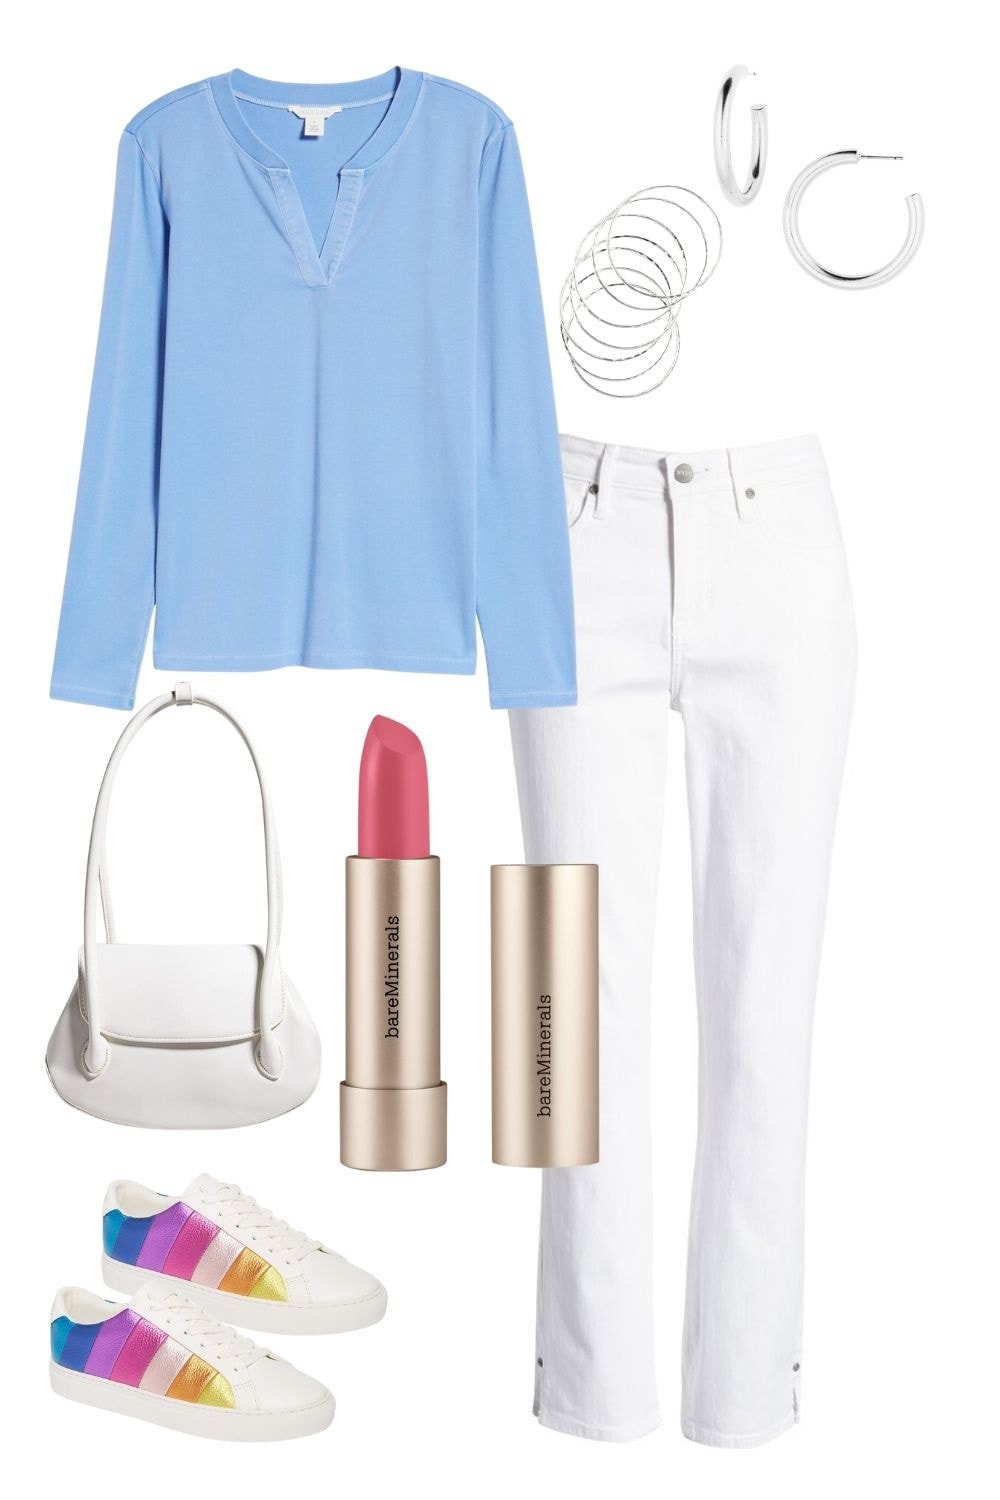 pop of color in sneakers with white jeans outfit